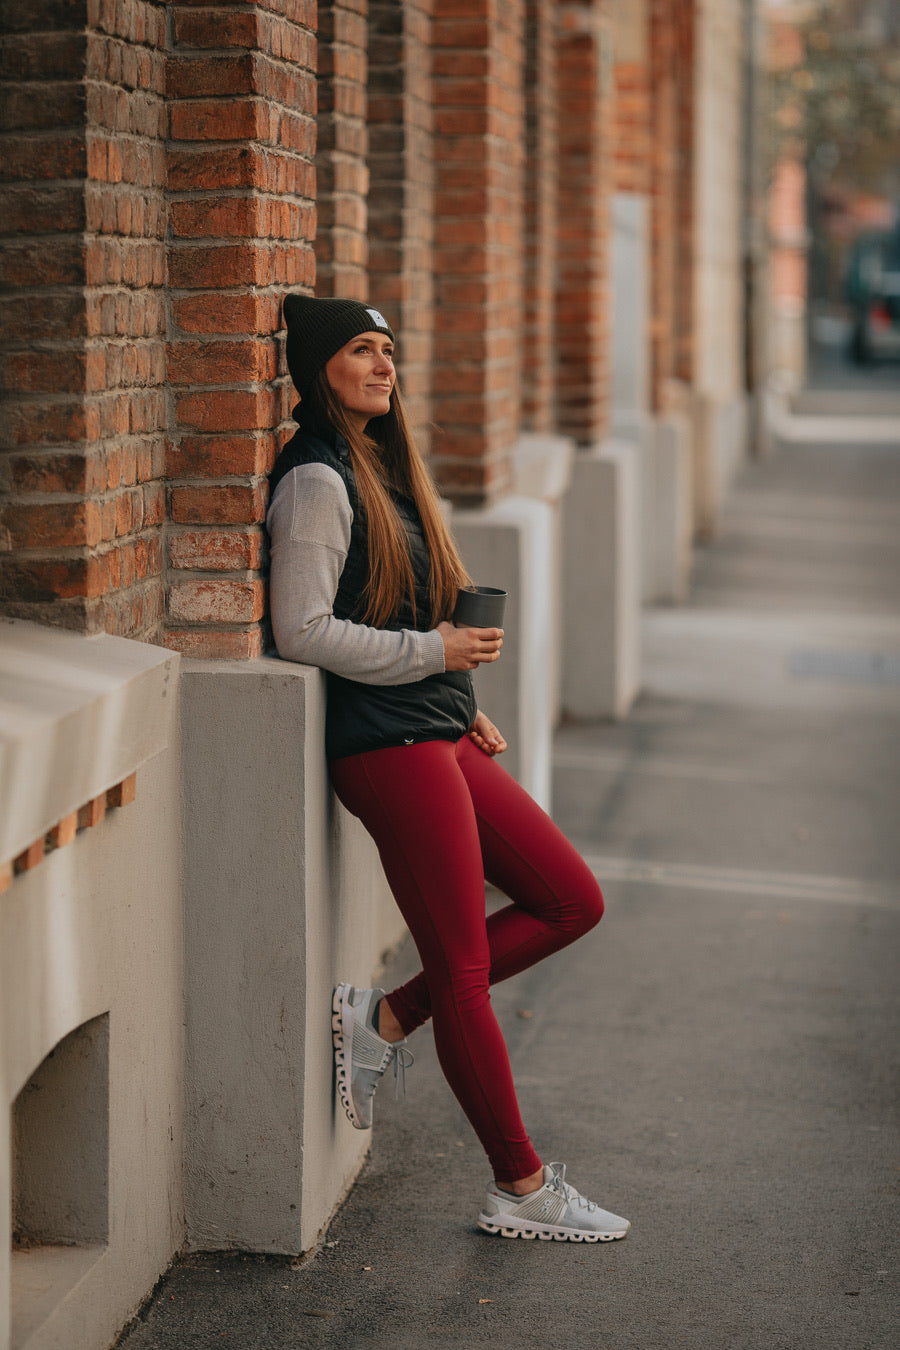 Alpine Princess Very Berry ECO leggings - women's outdoor leggings consisting of fabrics made from recycled fishing nets.